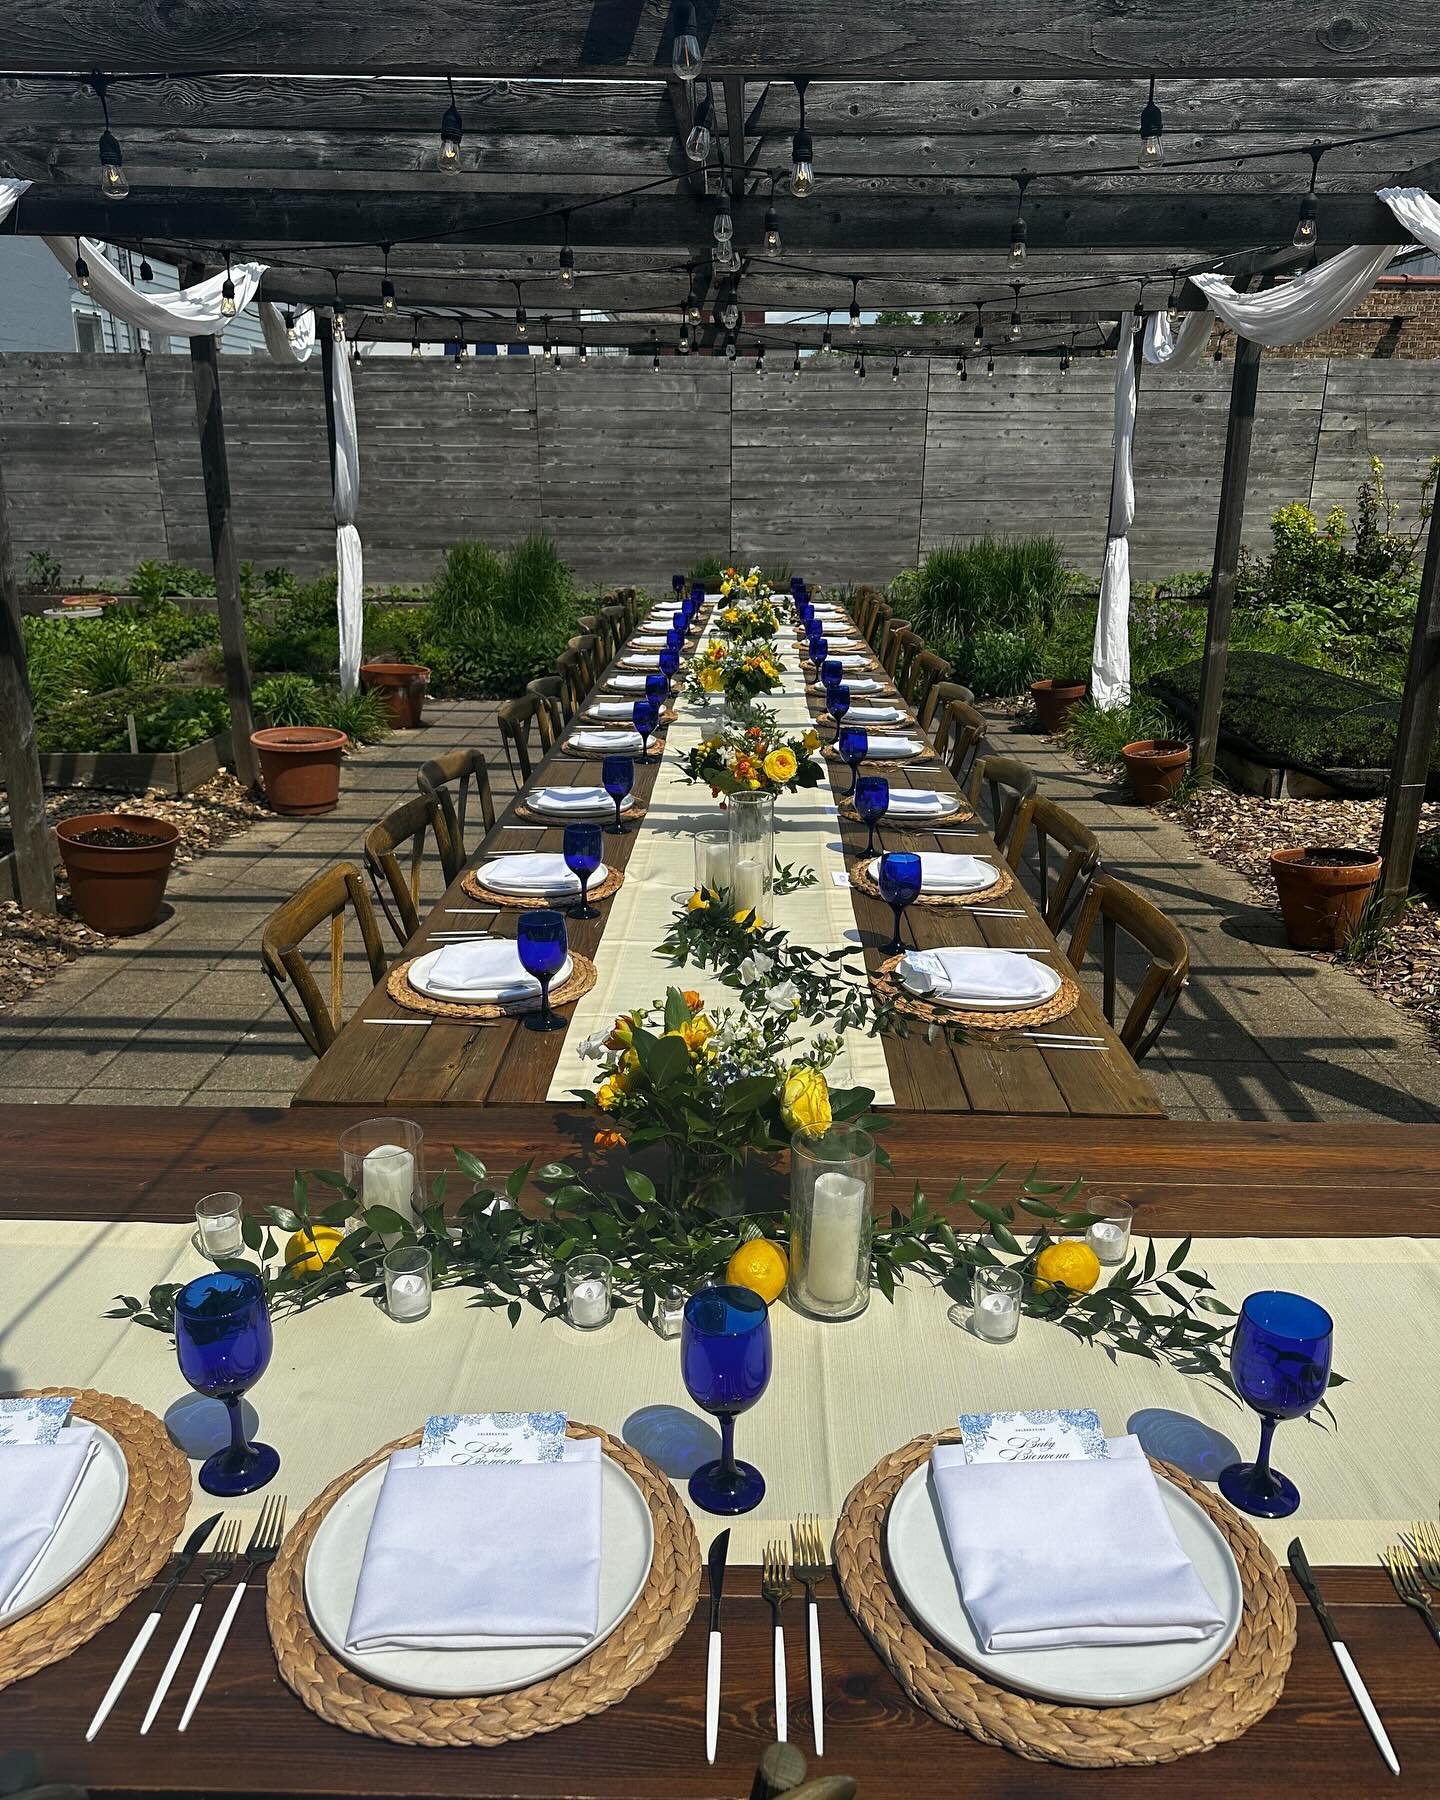 Weekend recap💫

We kicked off our outdoor event season with three private events in the Urban Farm: 

🍋 a baby shower (for a 2020 couple that got married at BDP)
💙 a beautiful wedding shower brunch, 
🎉 and a retirement celebration for the mother 